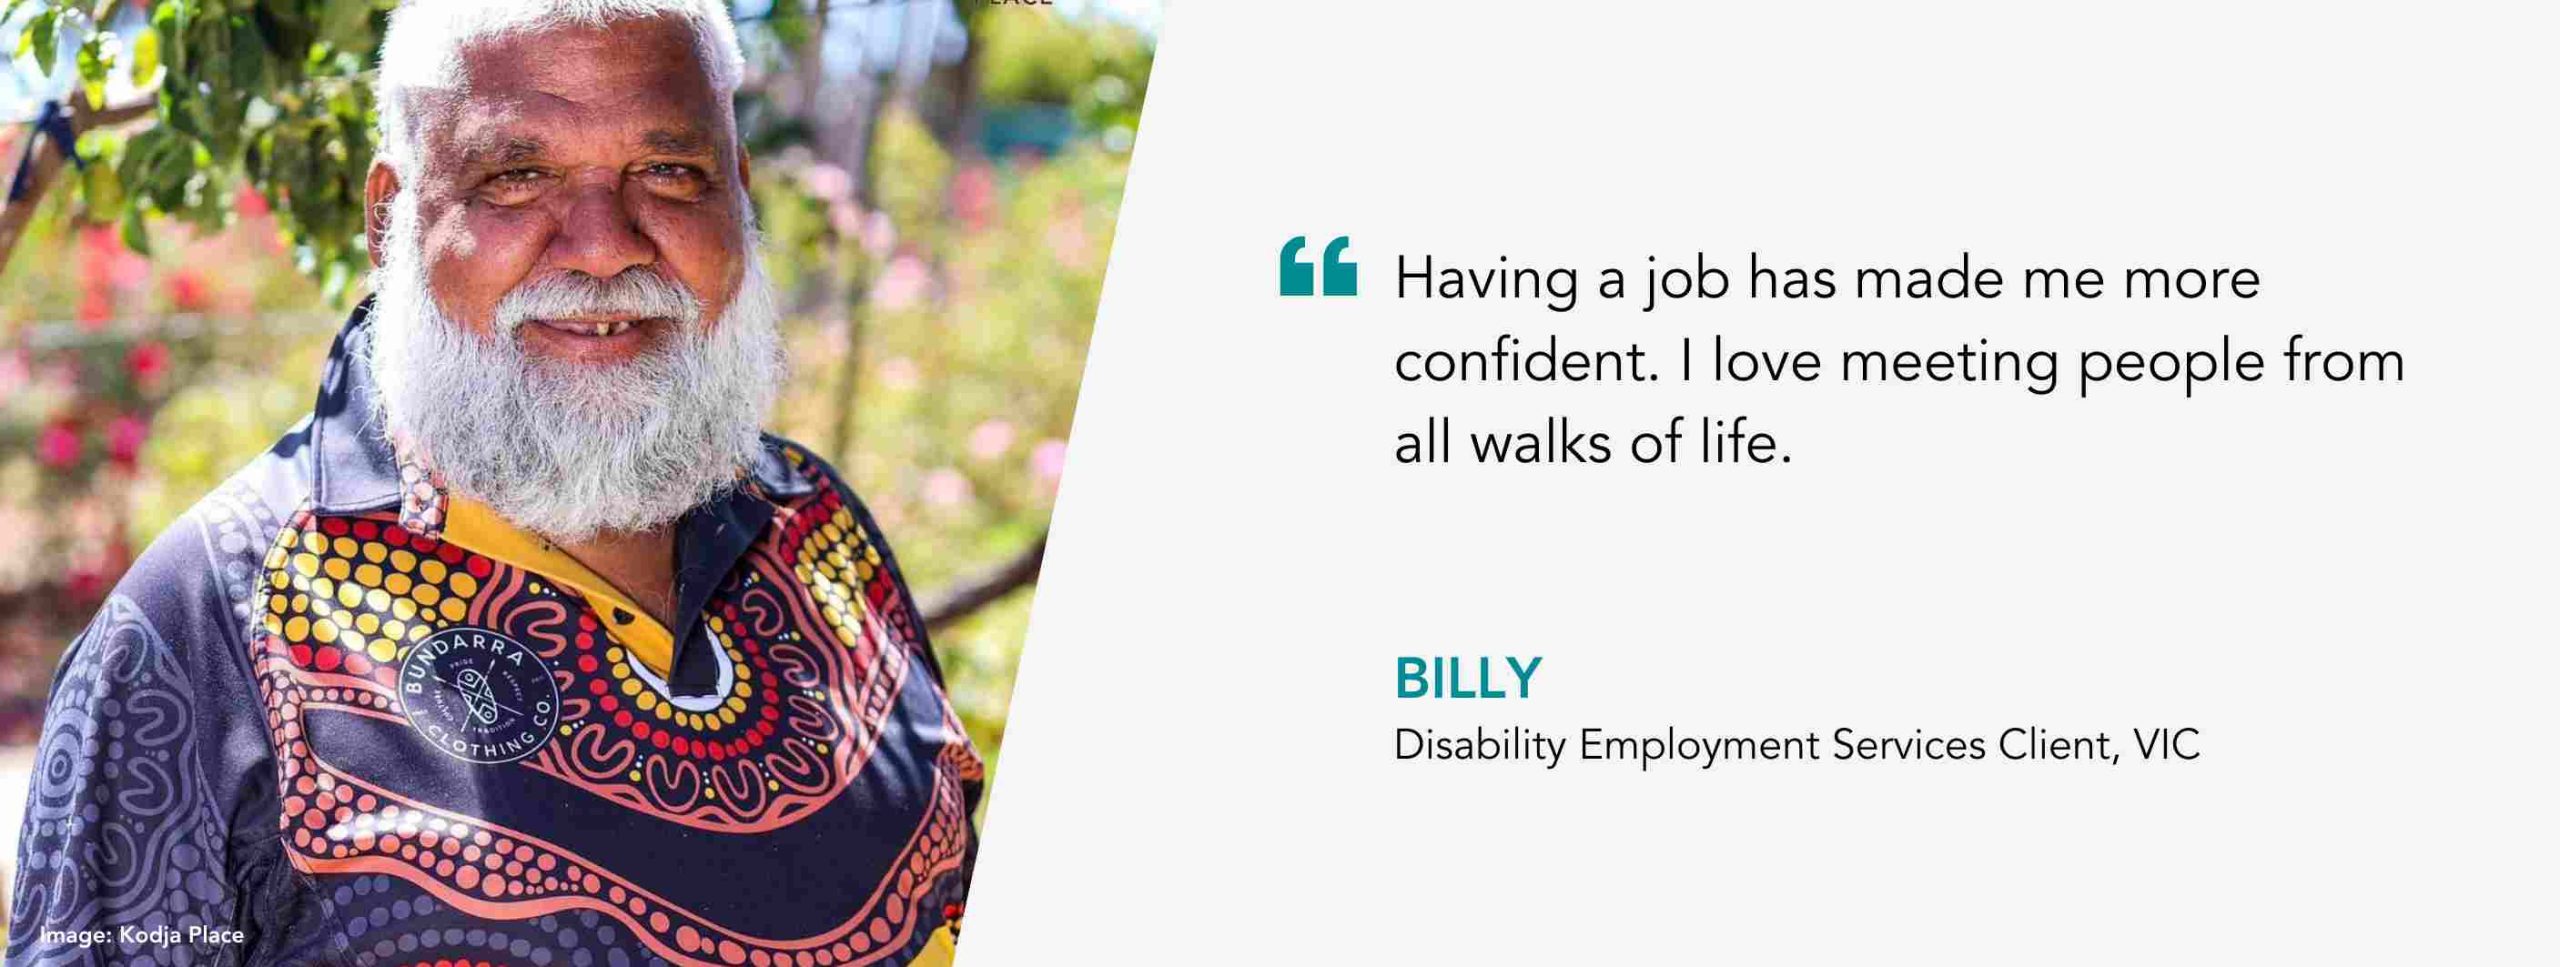 Having a job has made me more confident. I love meeting people from all walks of life. Billy, Disability Employment Services Client, WA